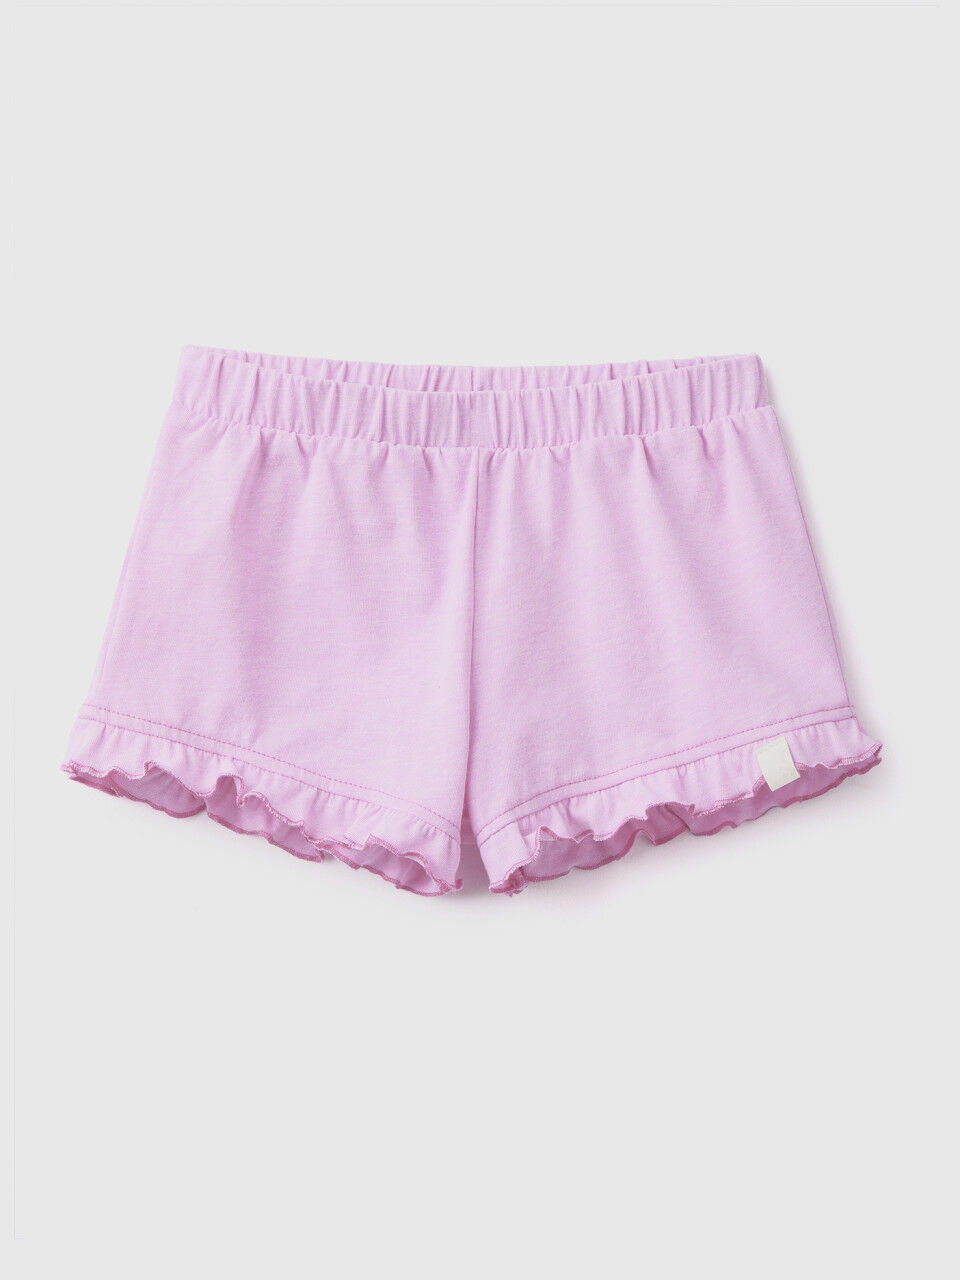 Shorts in recycled fabric with ruffles